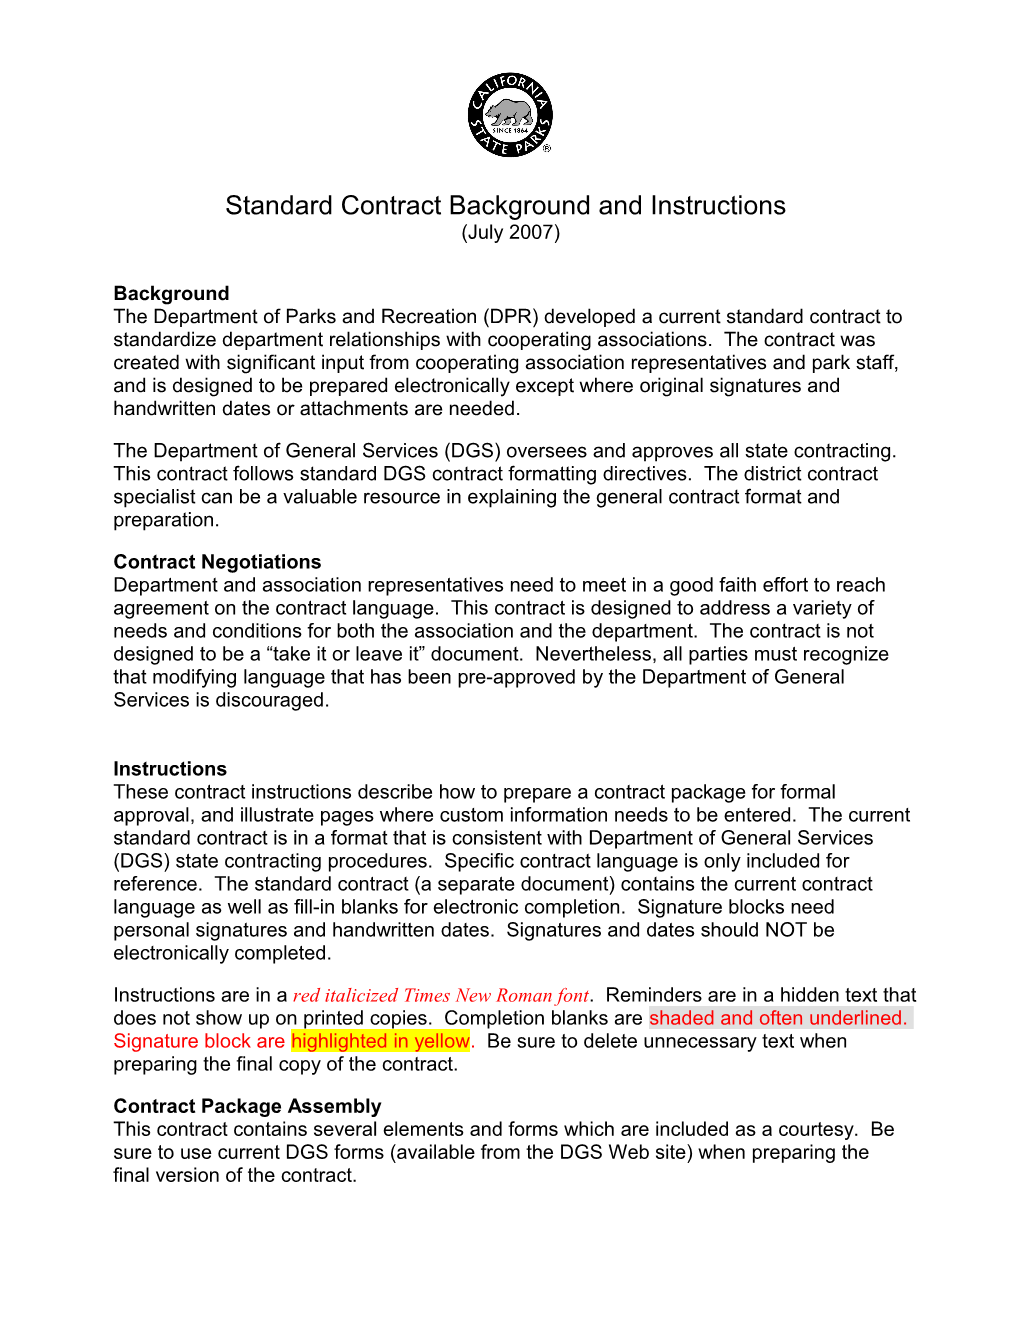 Standard Contractbackground and Instructions